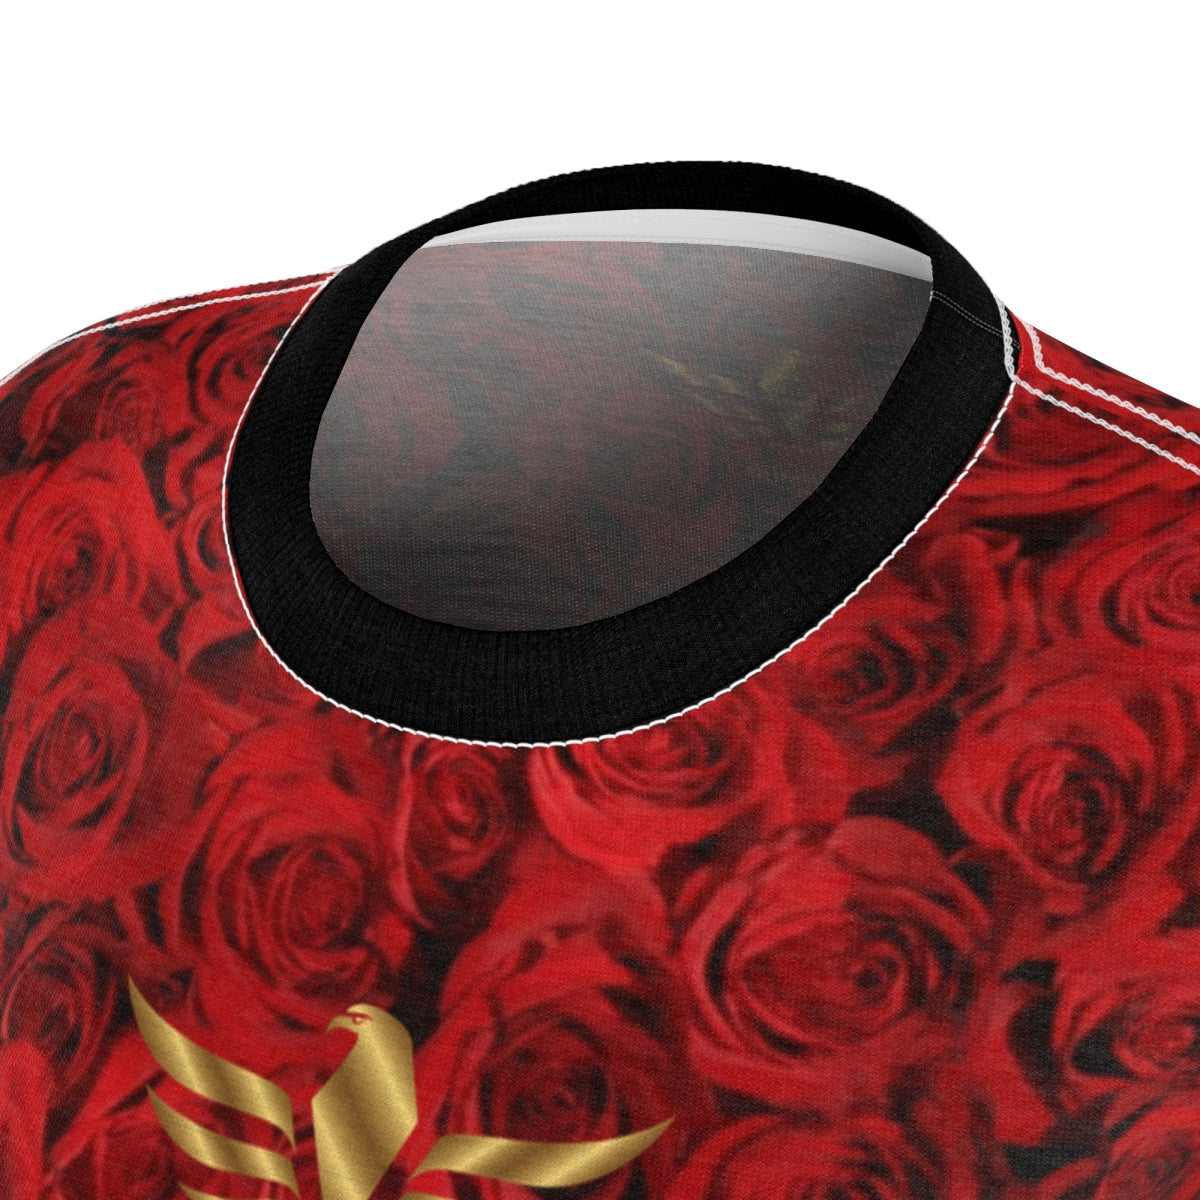 AH Vision Rose Red Women's Shirt With A Black Collar - AH VISION